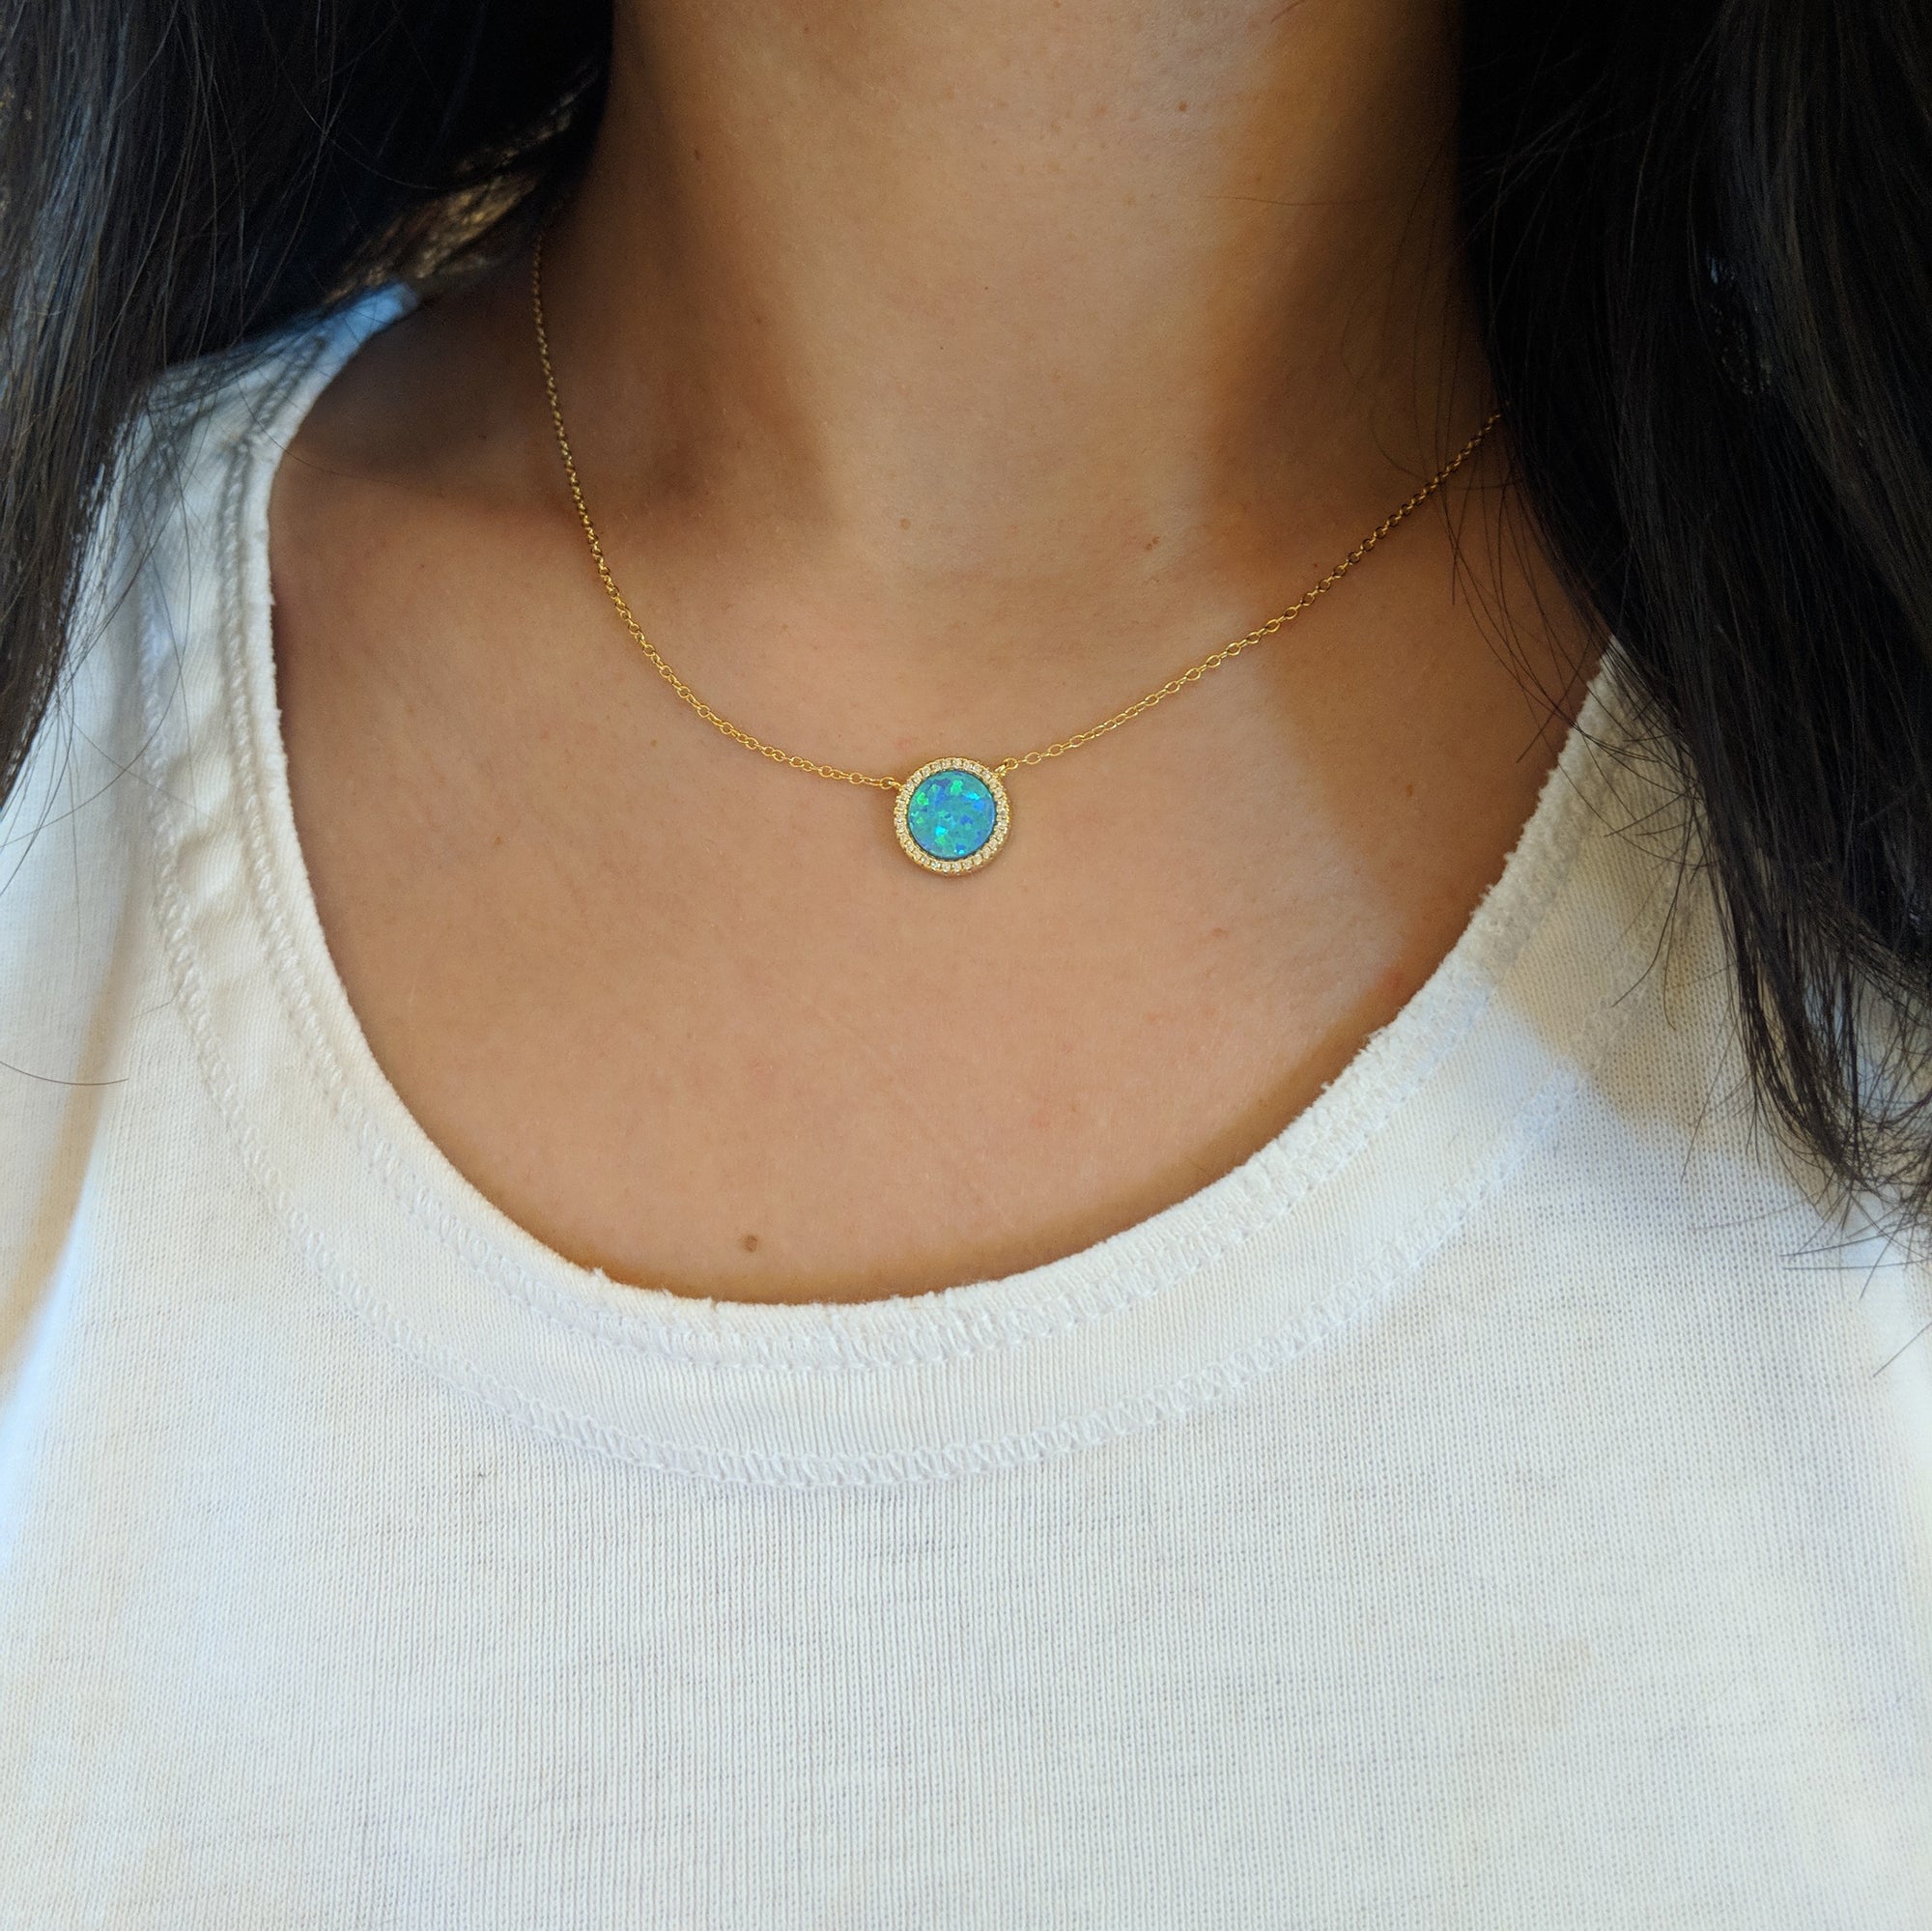 Beacon opal circle necklace with crystals in blue opal and gold